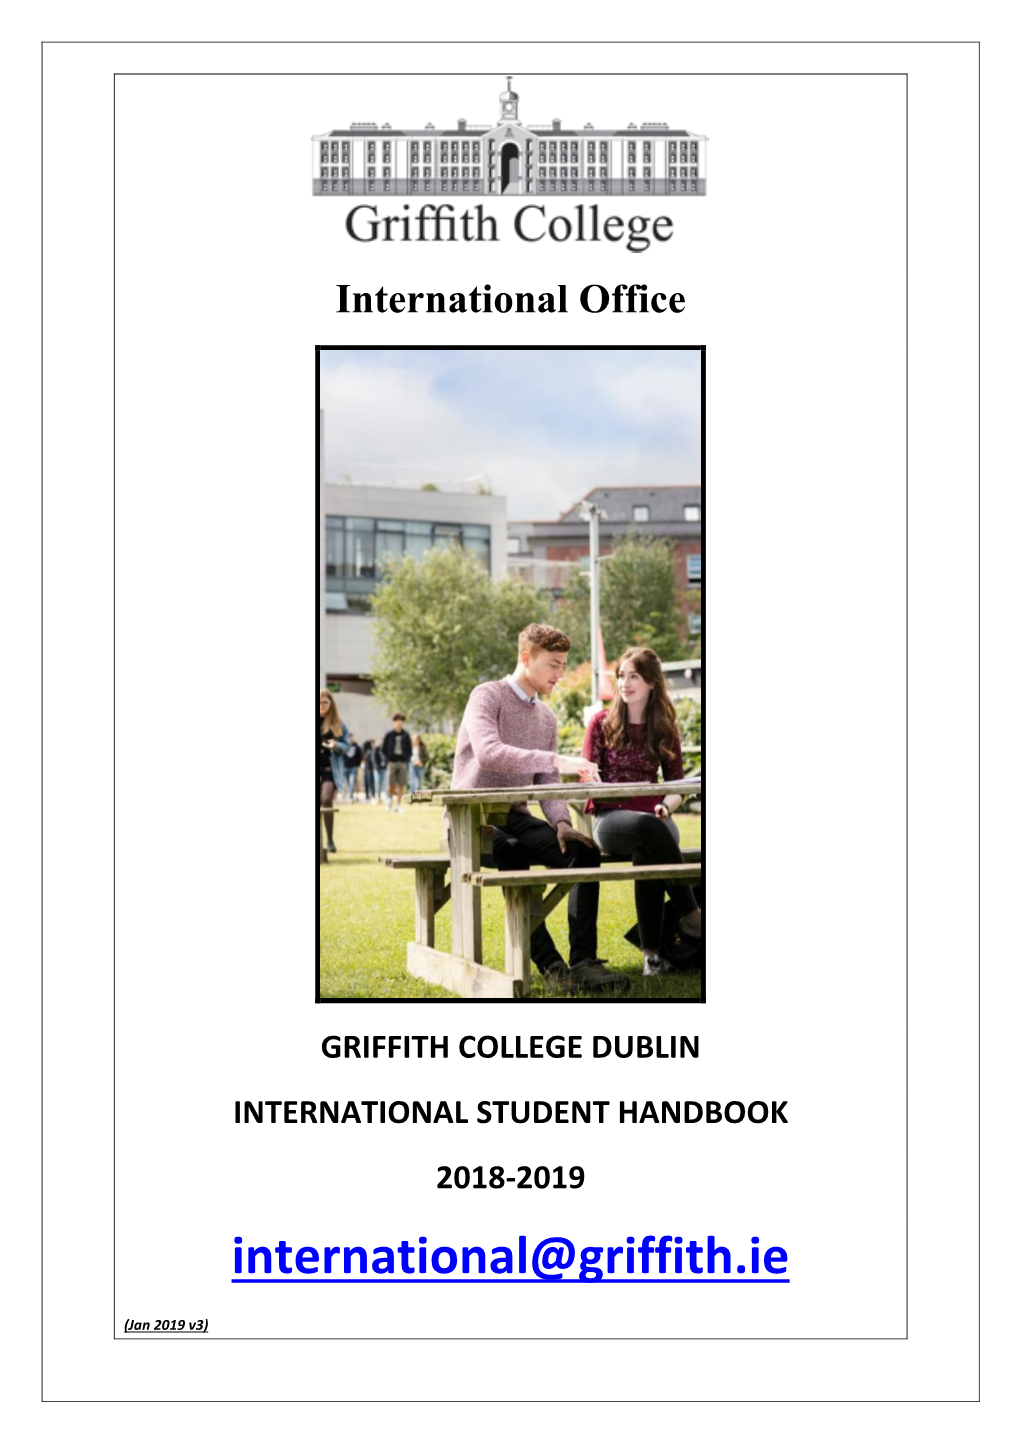 International@Griffith.Ie